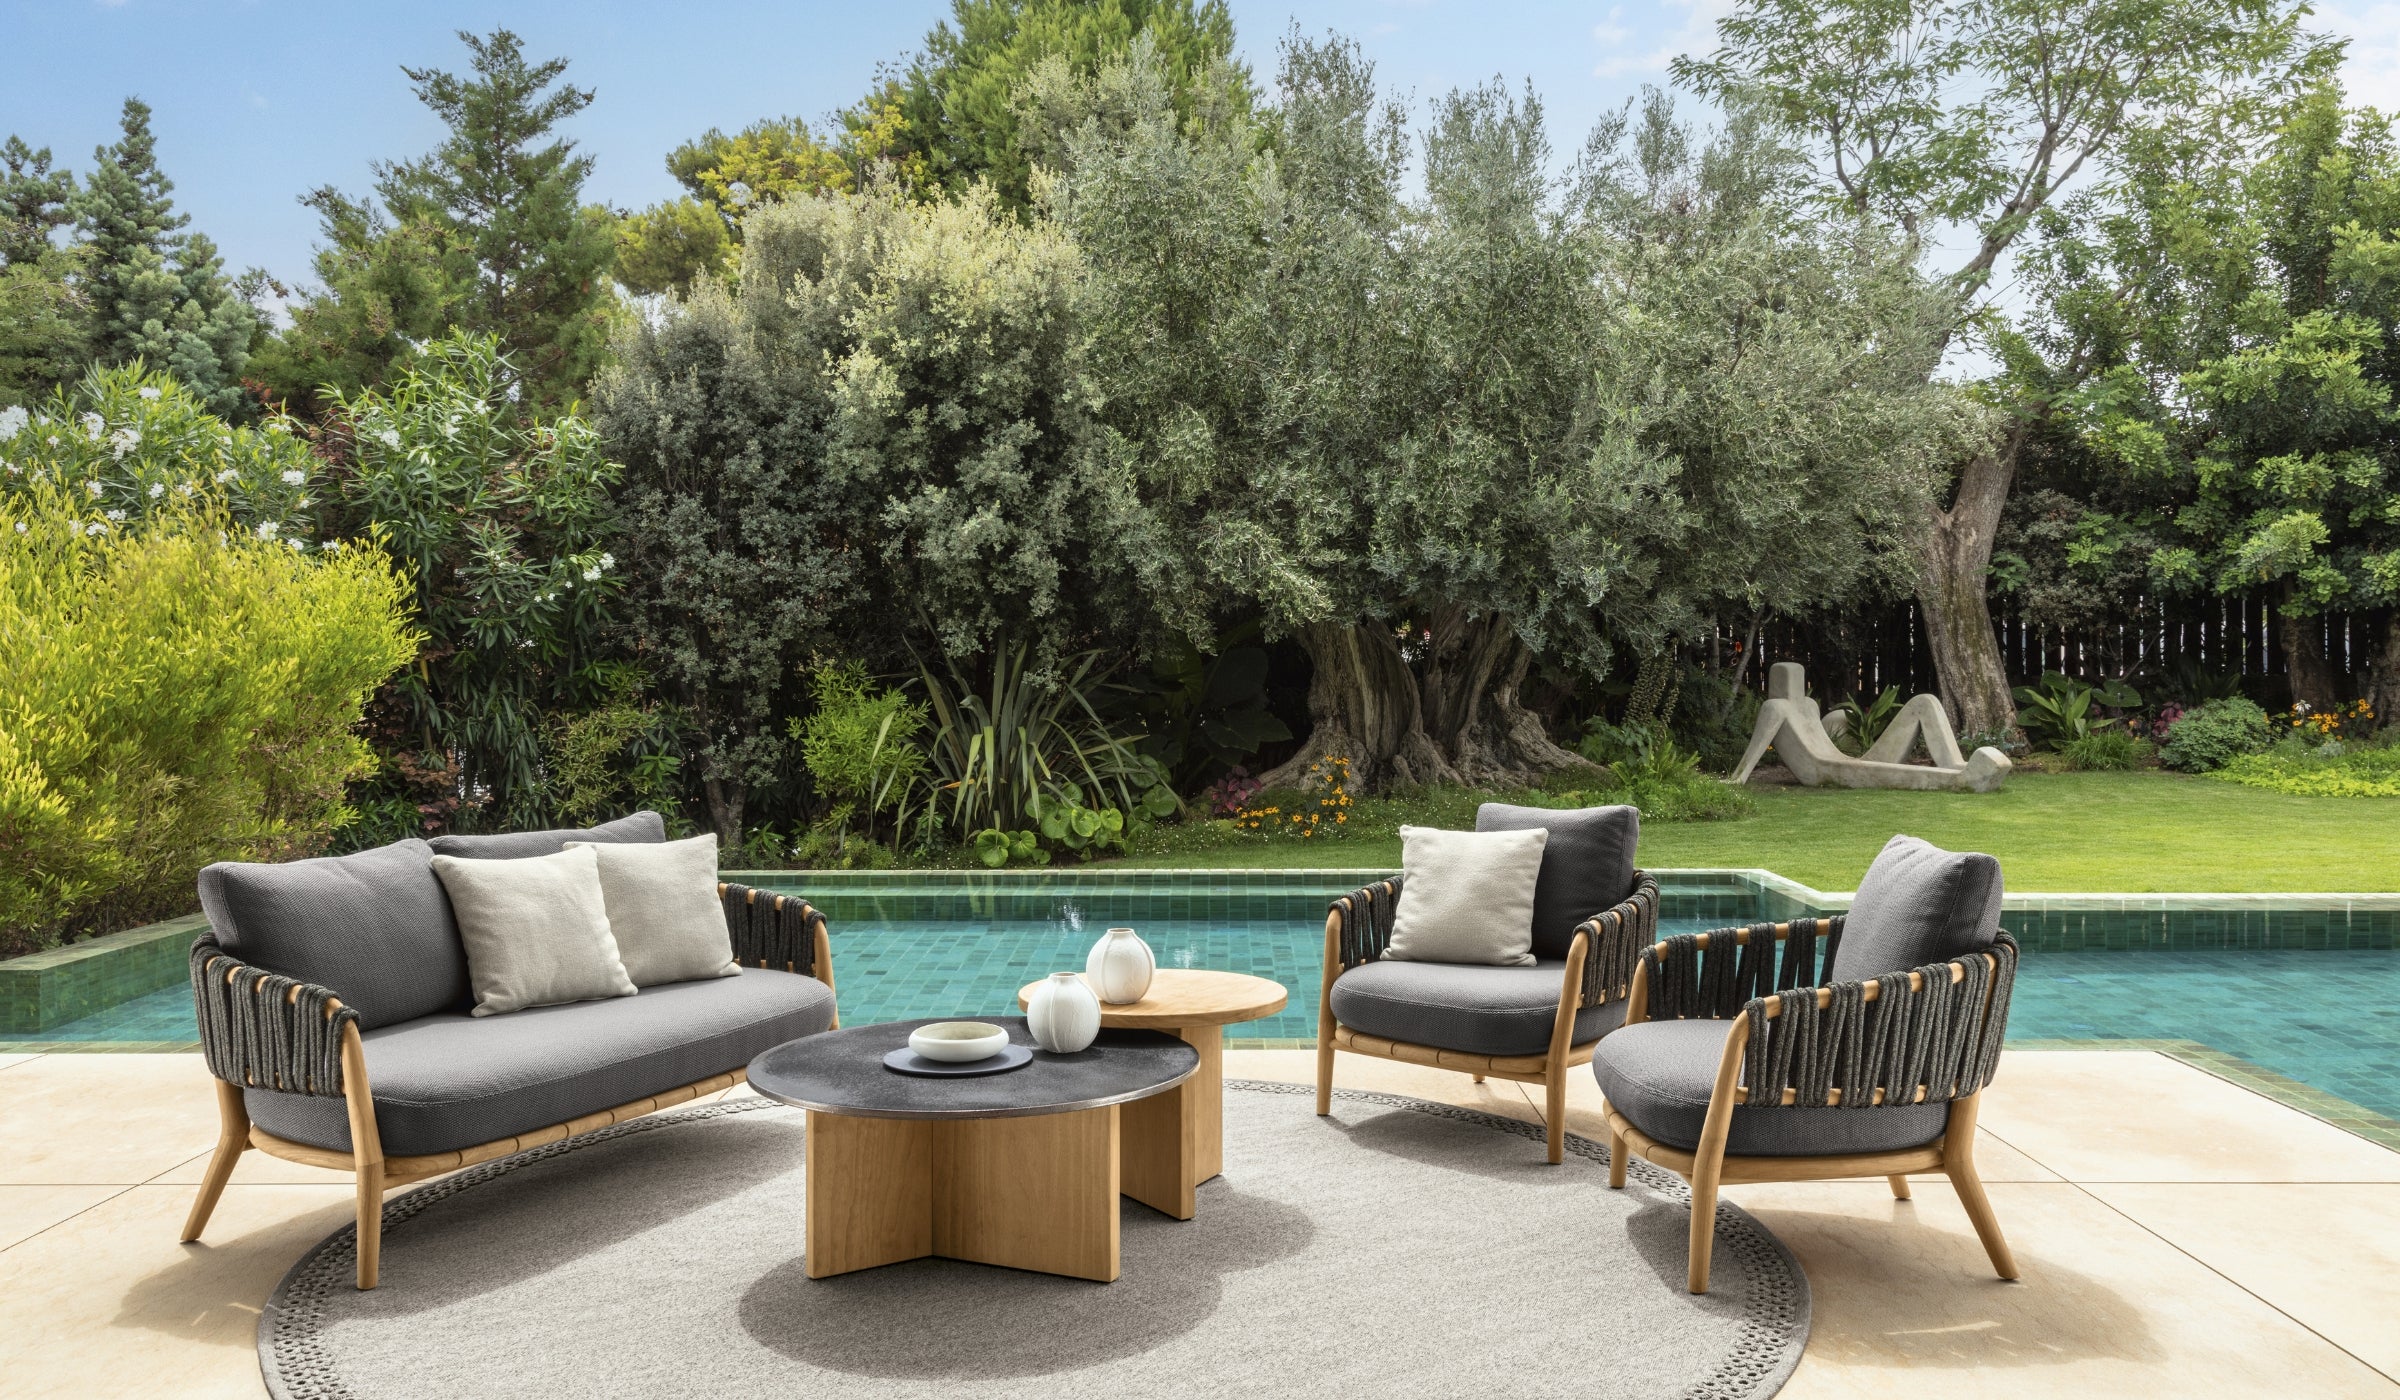 Venice - Outdoor coffee table in accoya wood and lava stone top, volcanic gray